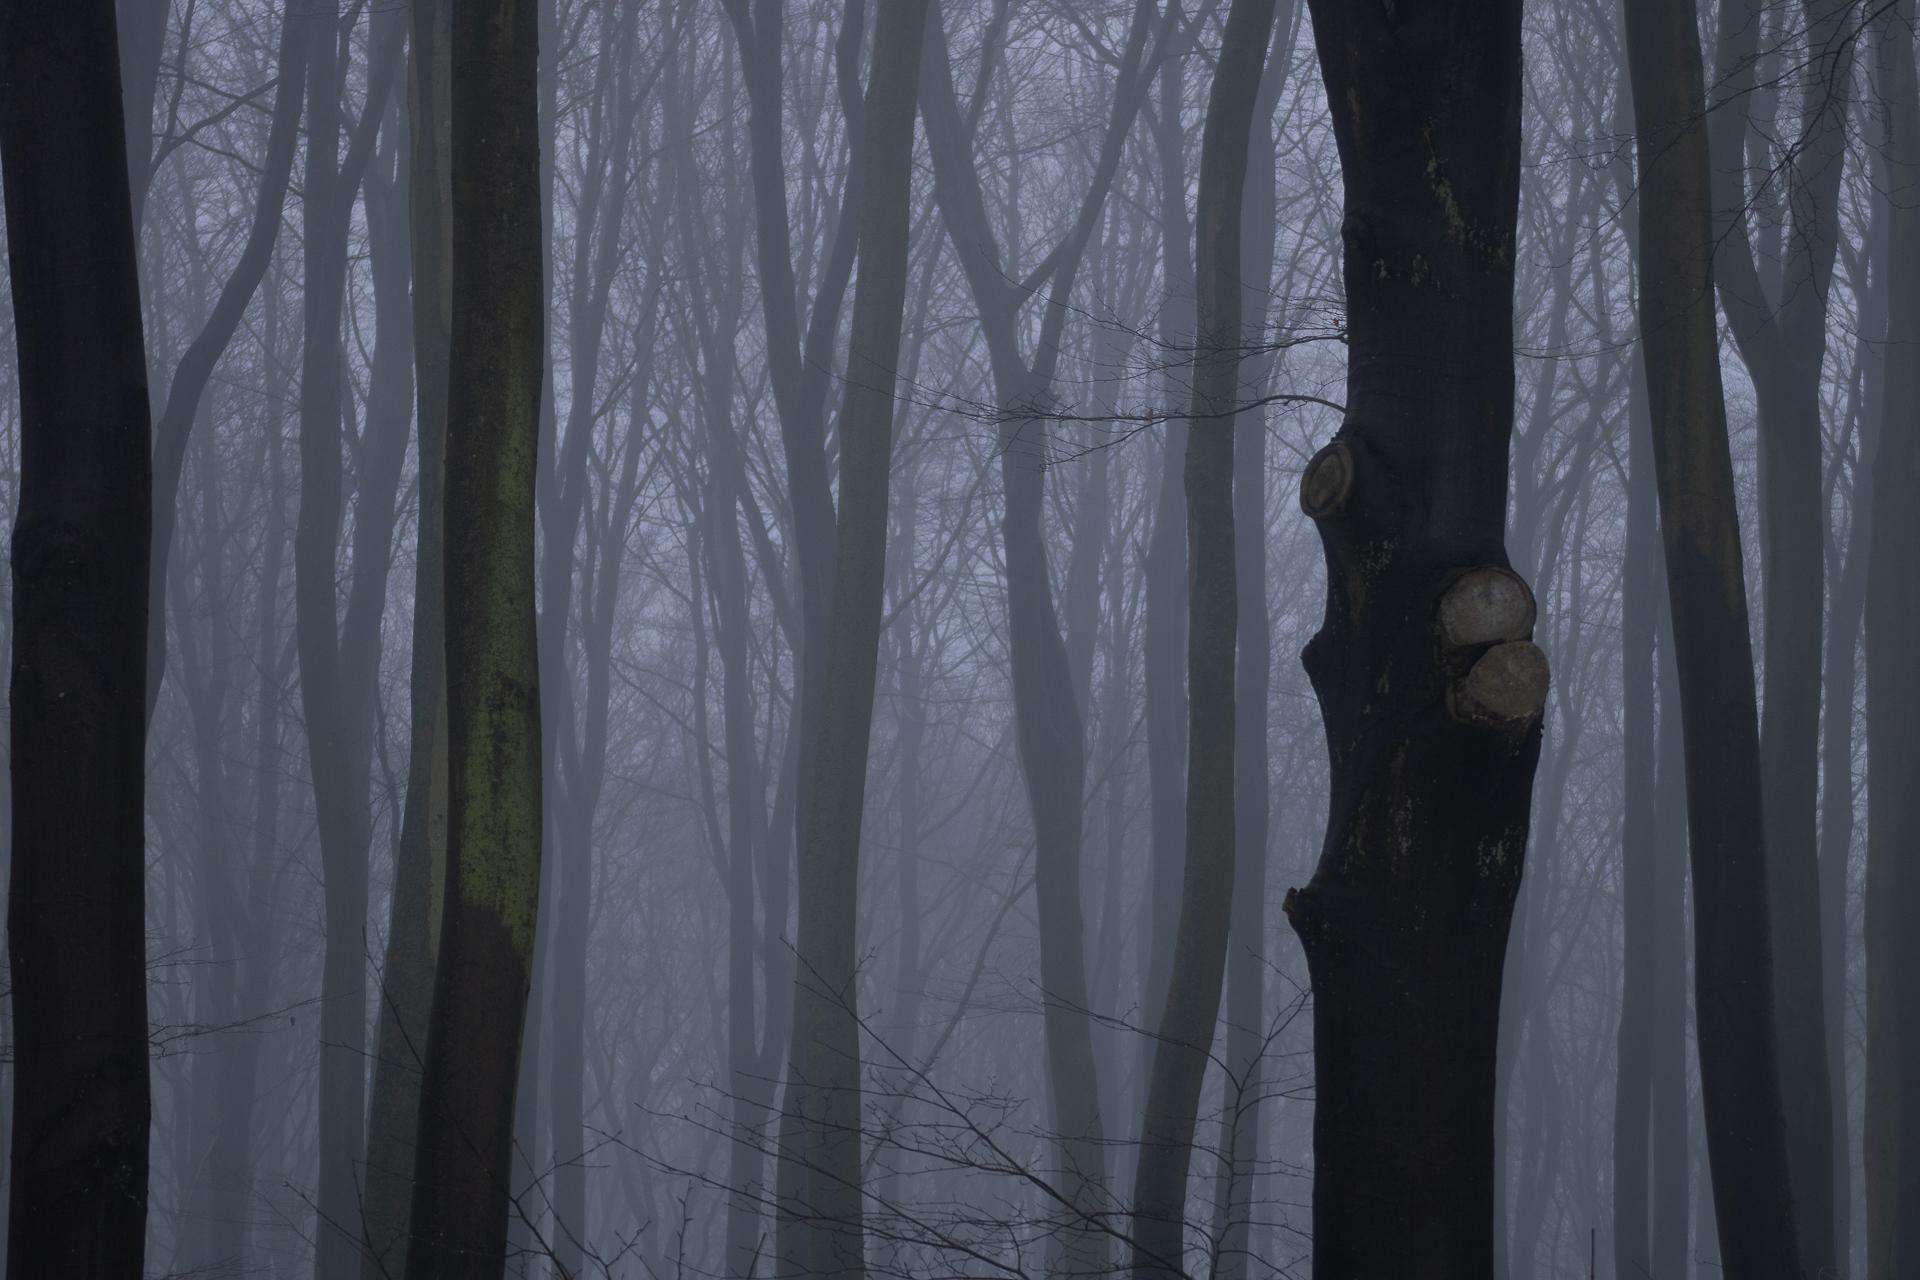 Moody and hazy forest in winter